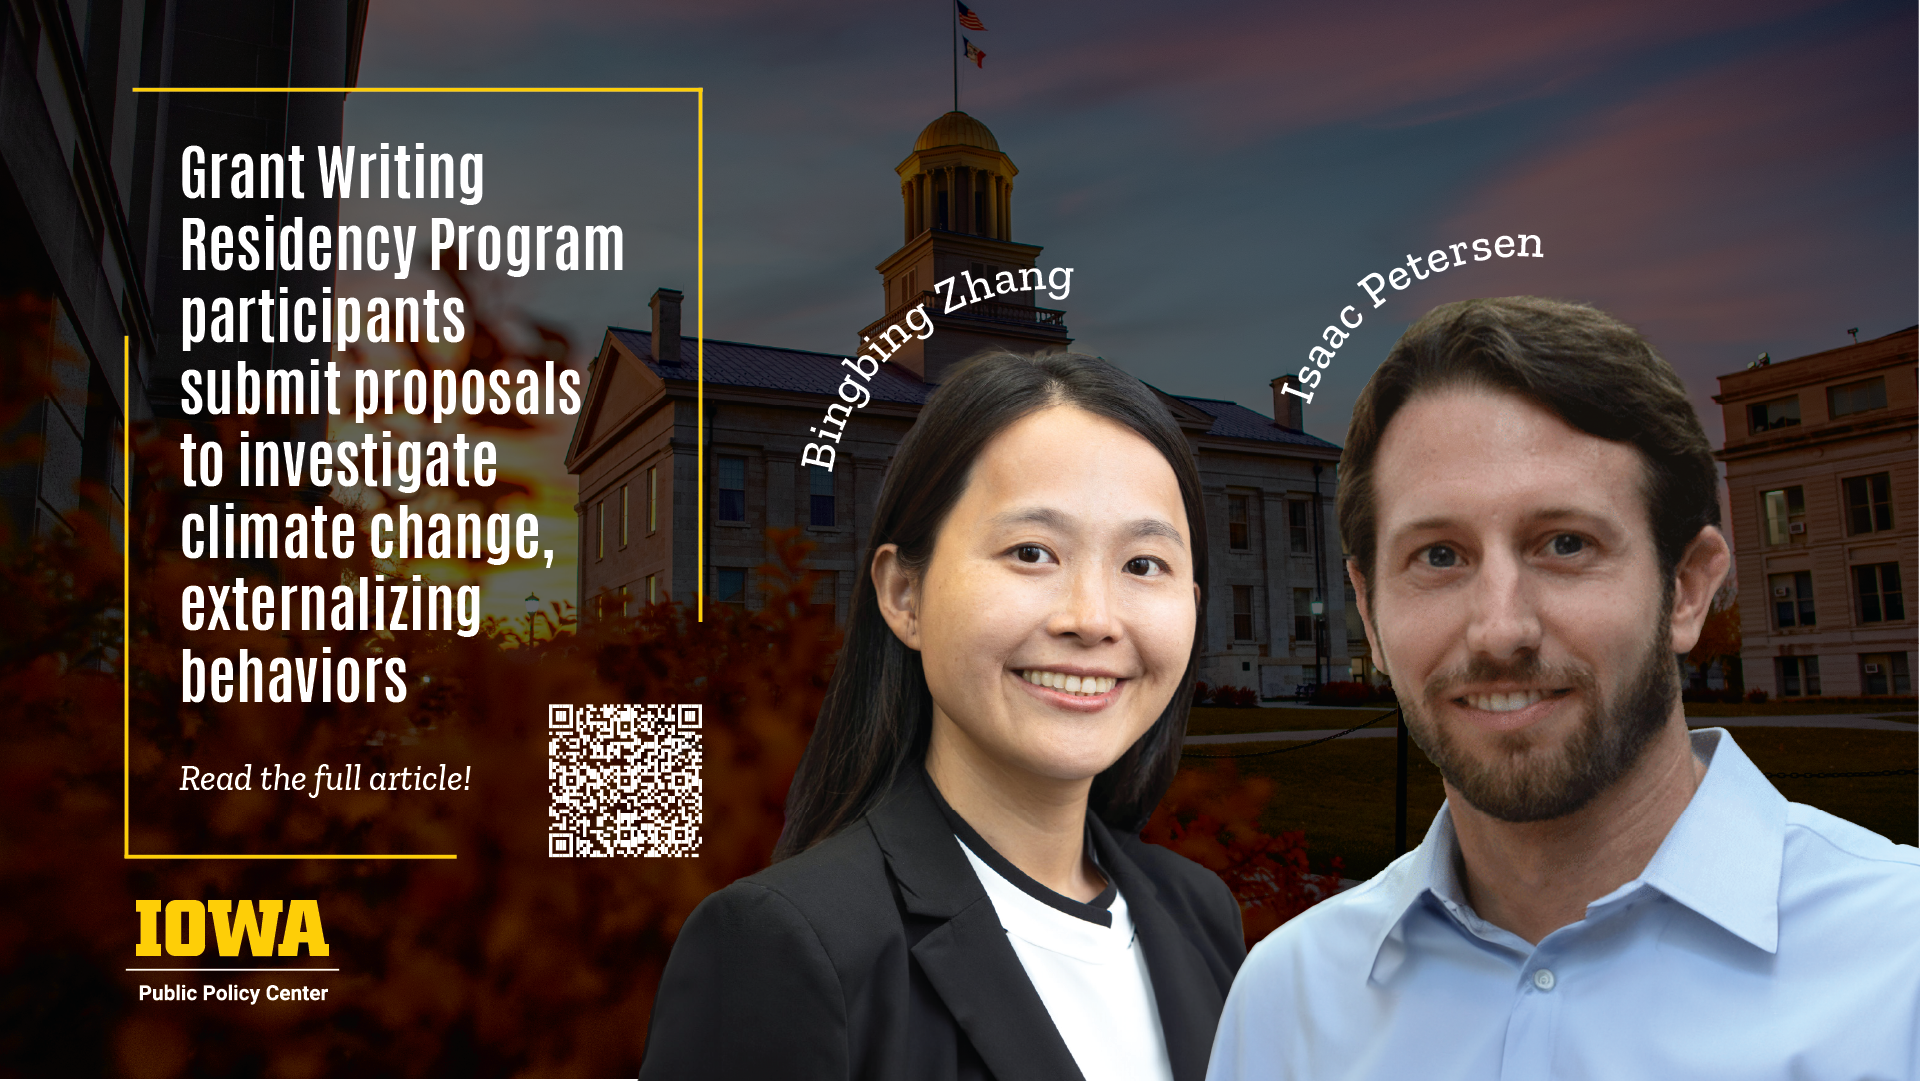 Bingbing Zhang and Isaac Petersen are pictured next to a text box, which reads "Grant Writing Residency Program Participants Submit Proposals to Investigate Climate Change, Externalizing Behaviors." 